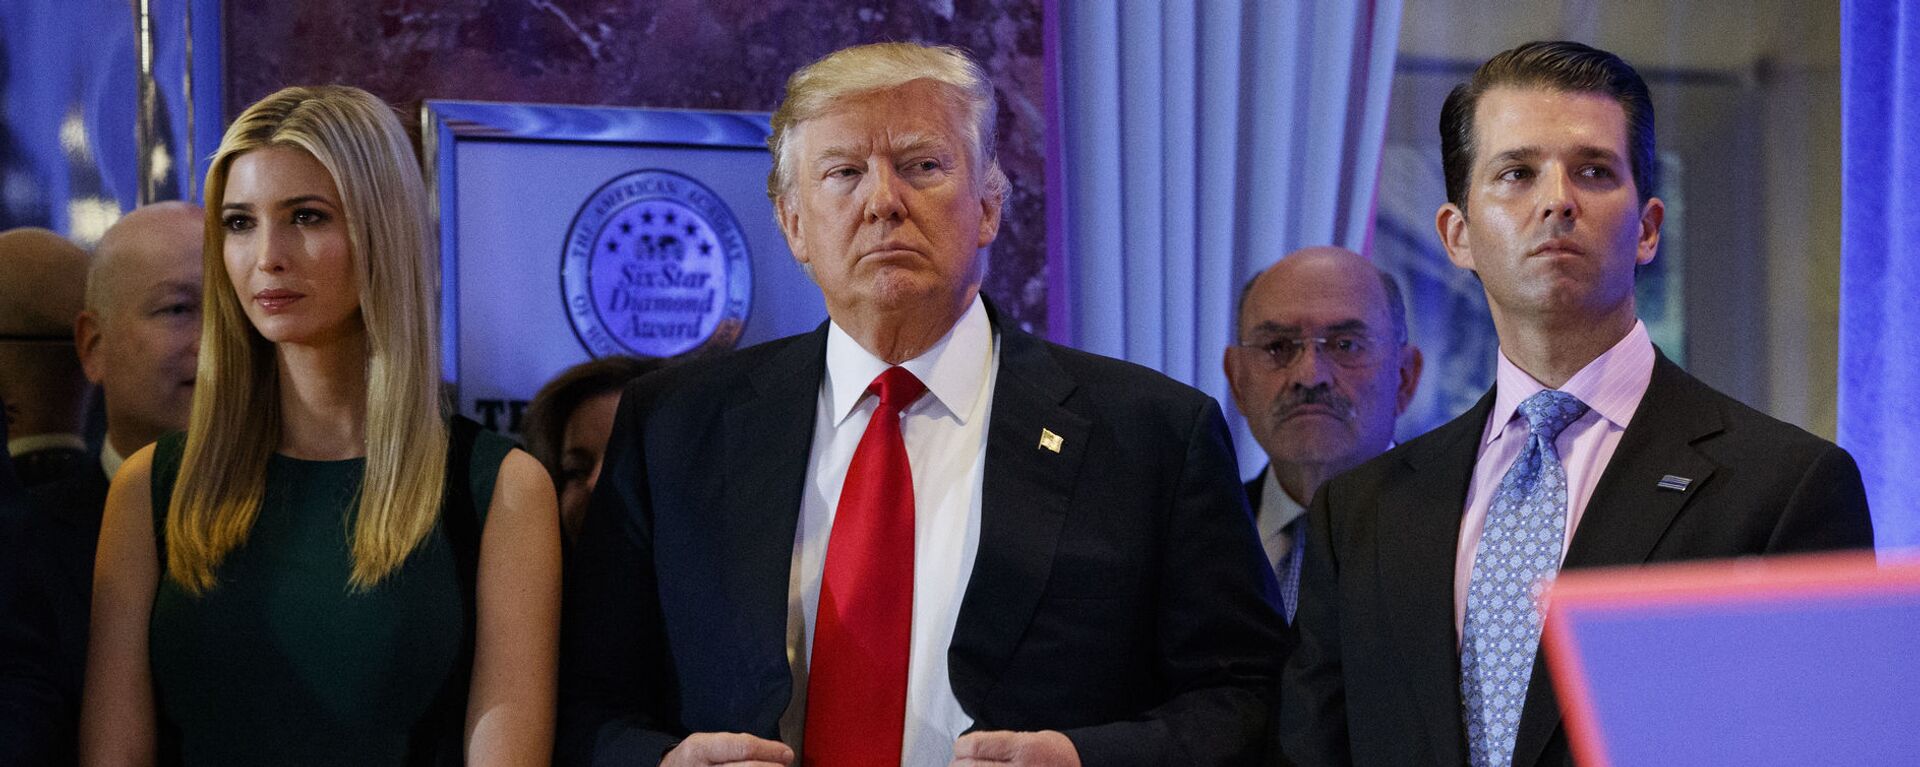 In this 11 January 2017, photo, President-elect Donald Trump, centre, stands next to Allen Weisselberg, second from left, Donald Trump Jr., right and Ivanka Trump, left, at a news conference in the lobby of Trump Tower in New York - Sputnik International, 1920, 01.07.2021